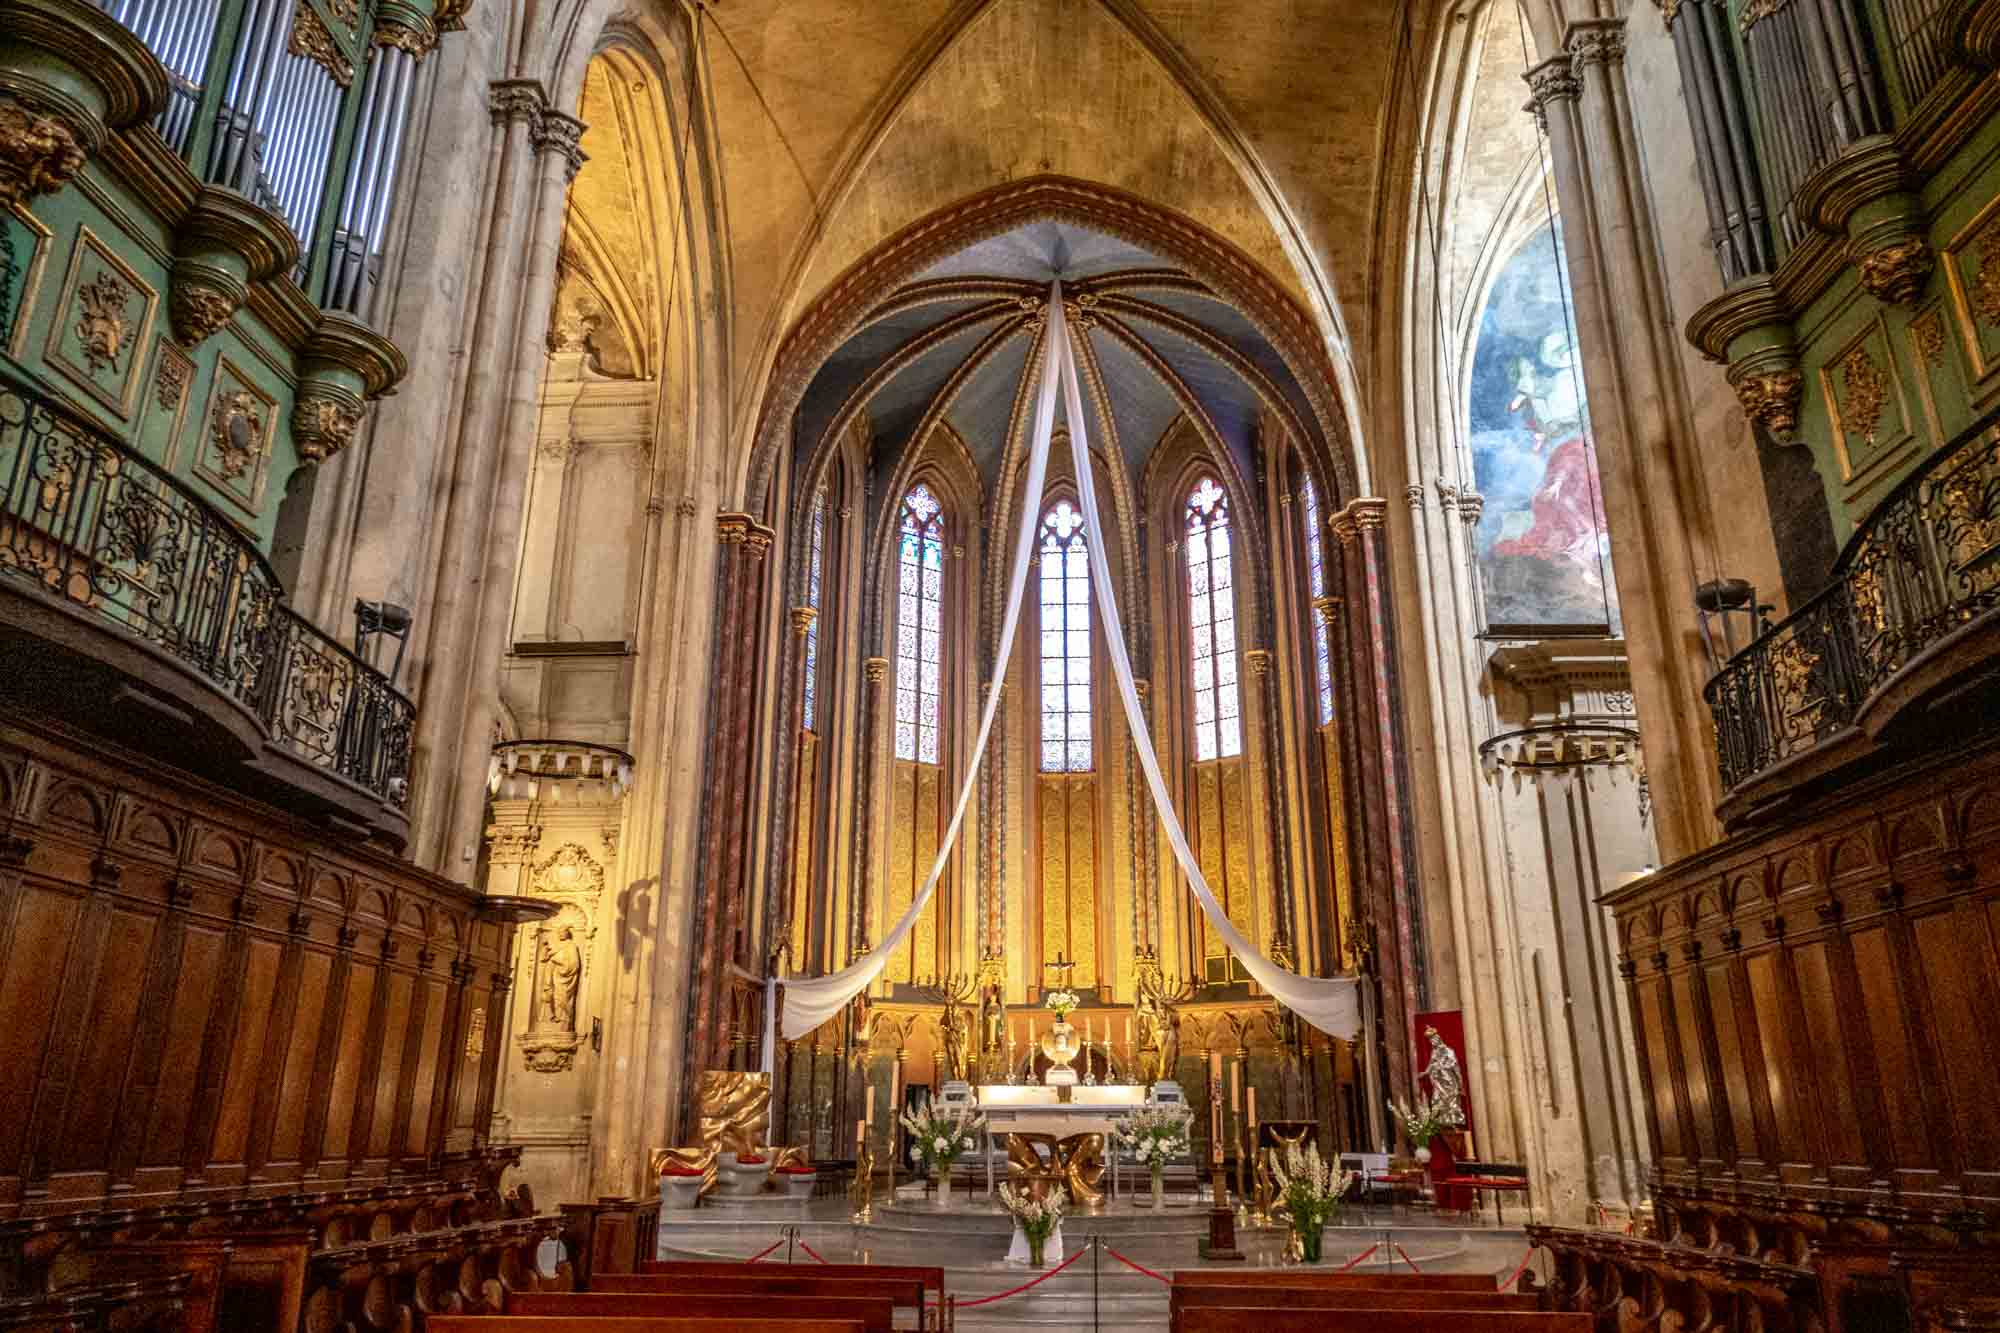 Interior of a cathedral sanctuary with a pipe organ and vaulted ceiling